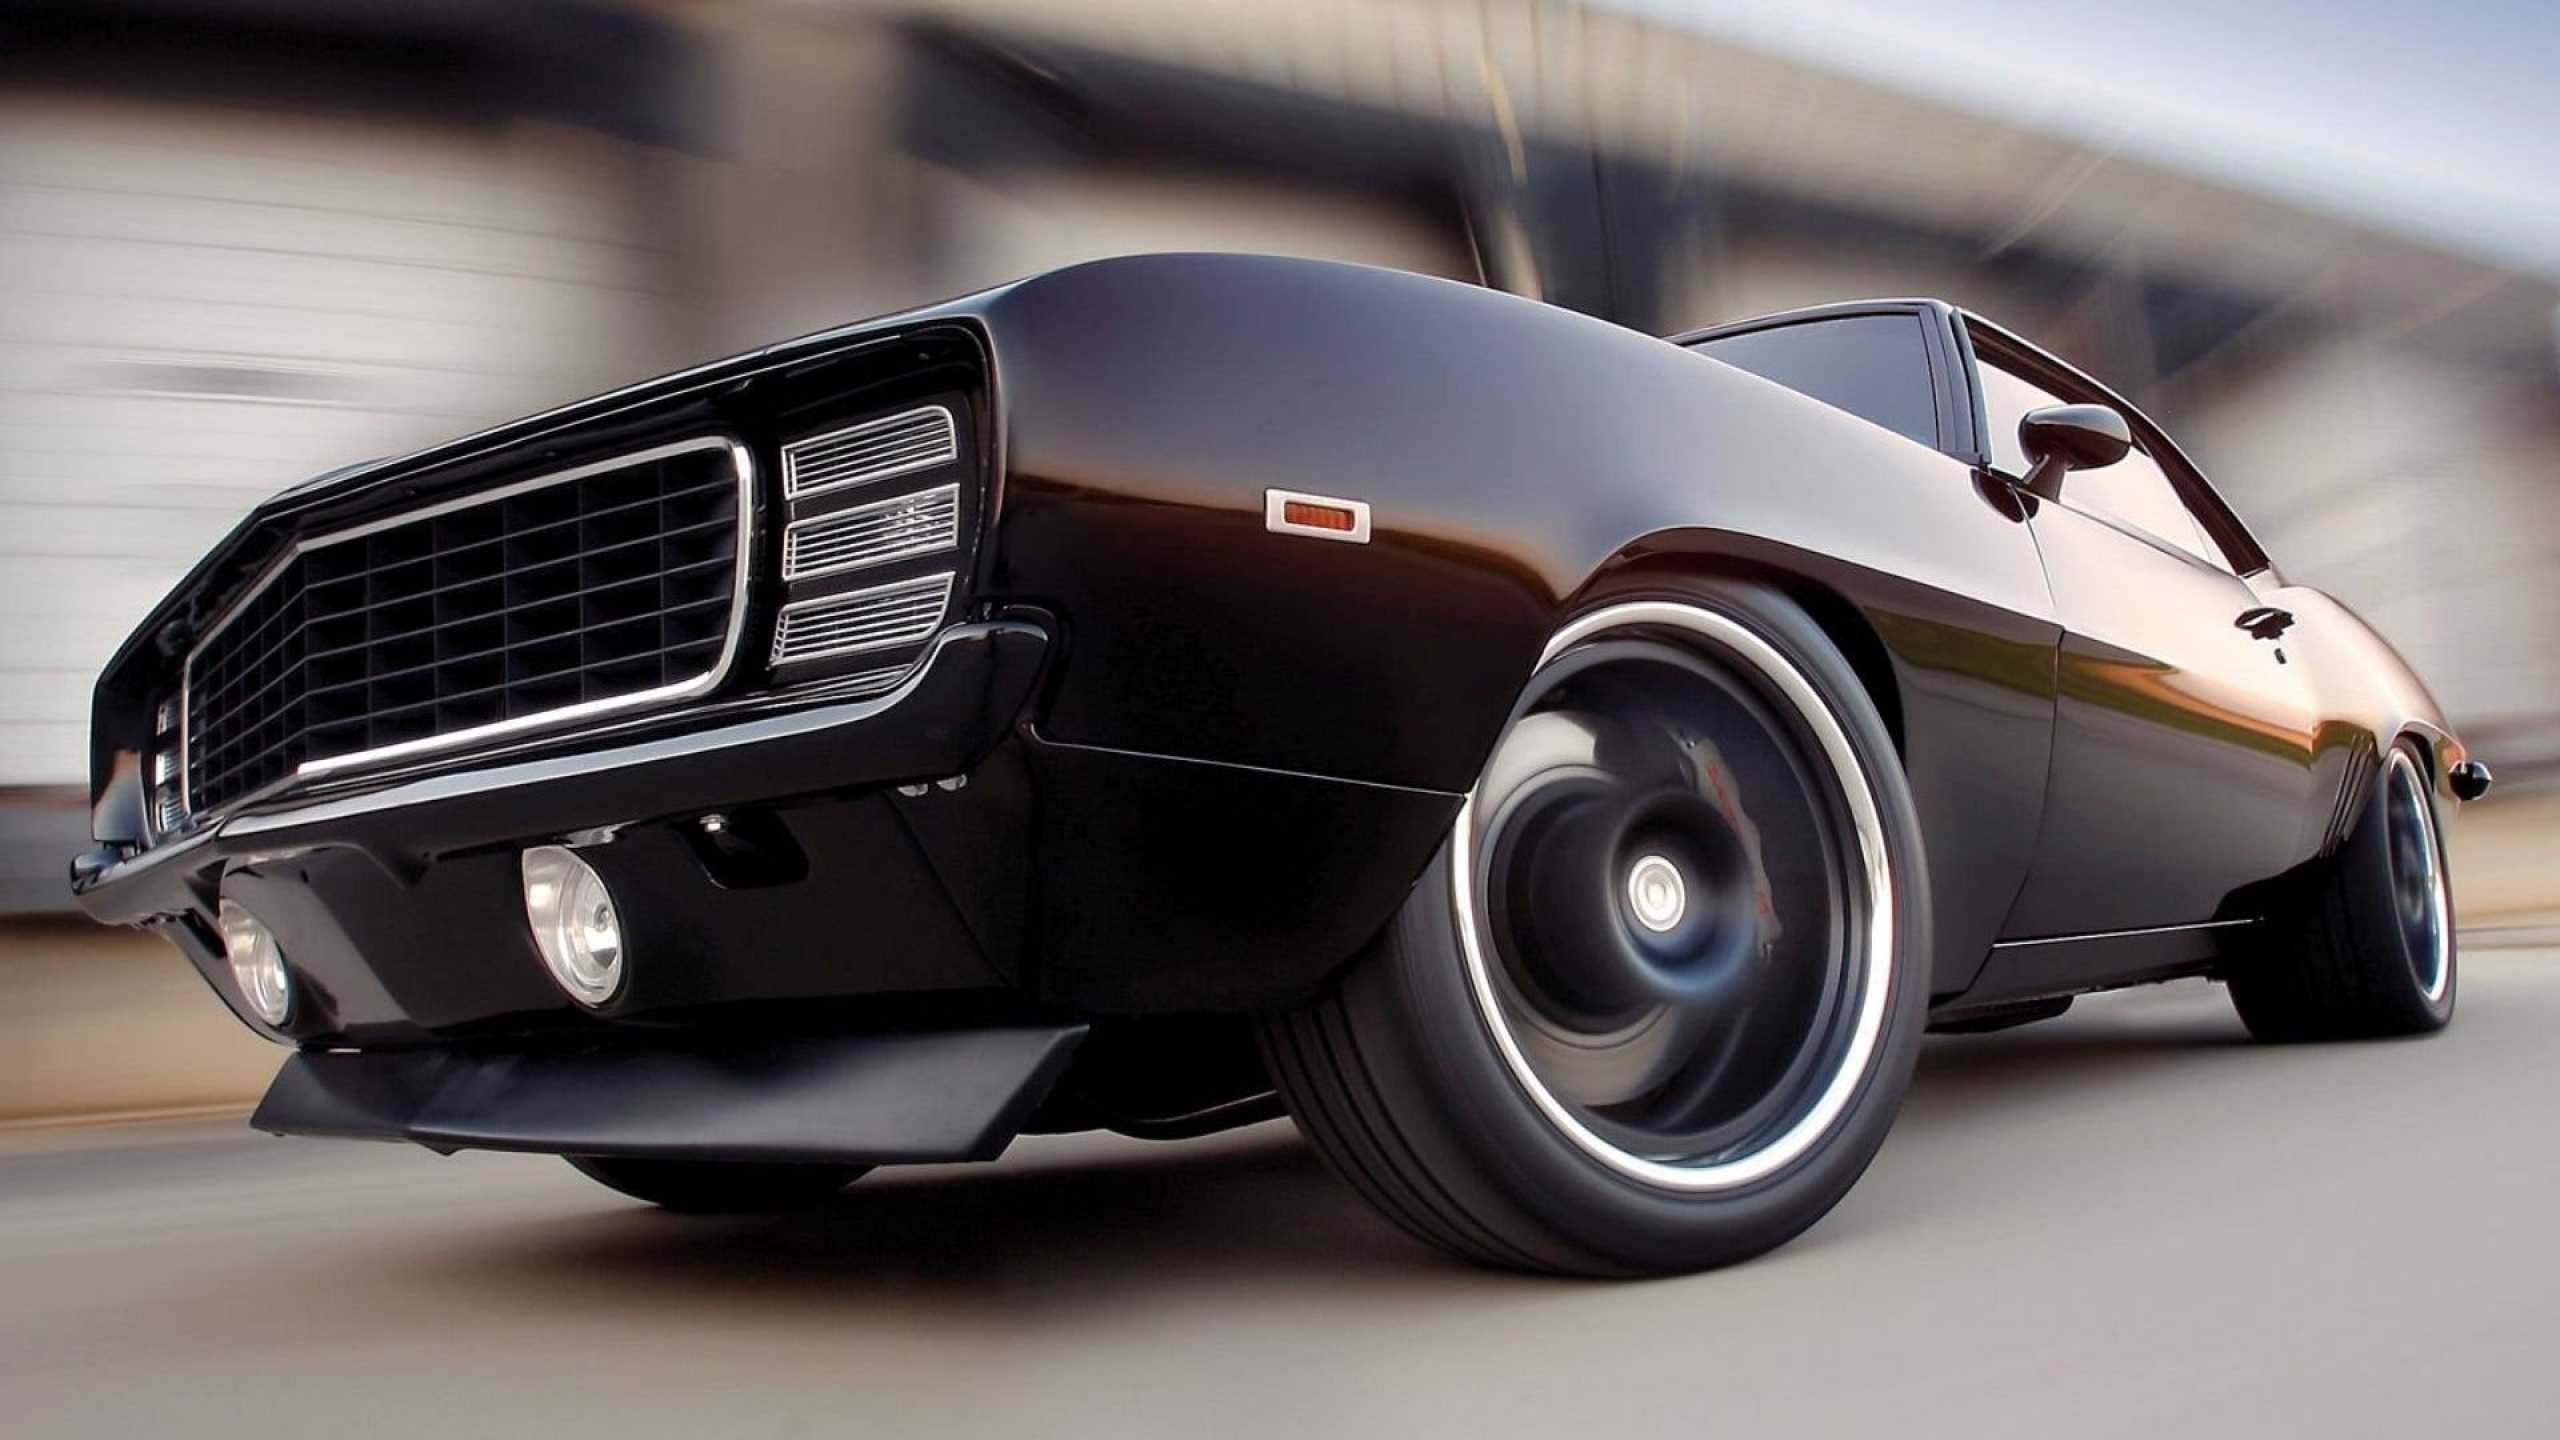 267 Awesome Hotrod muscle cars wallpaper 2560x1440 for Collection